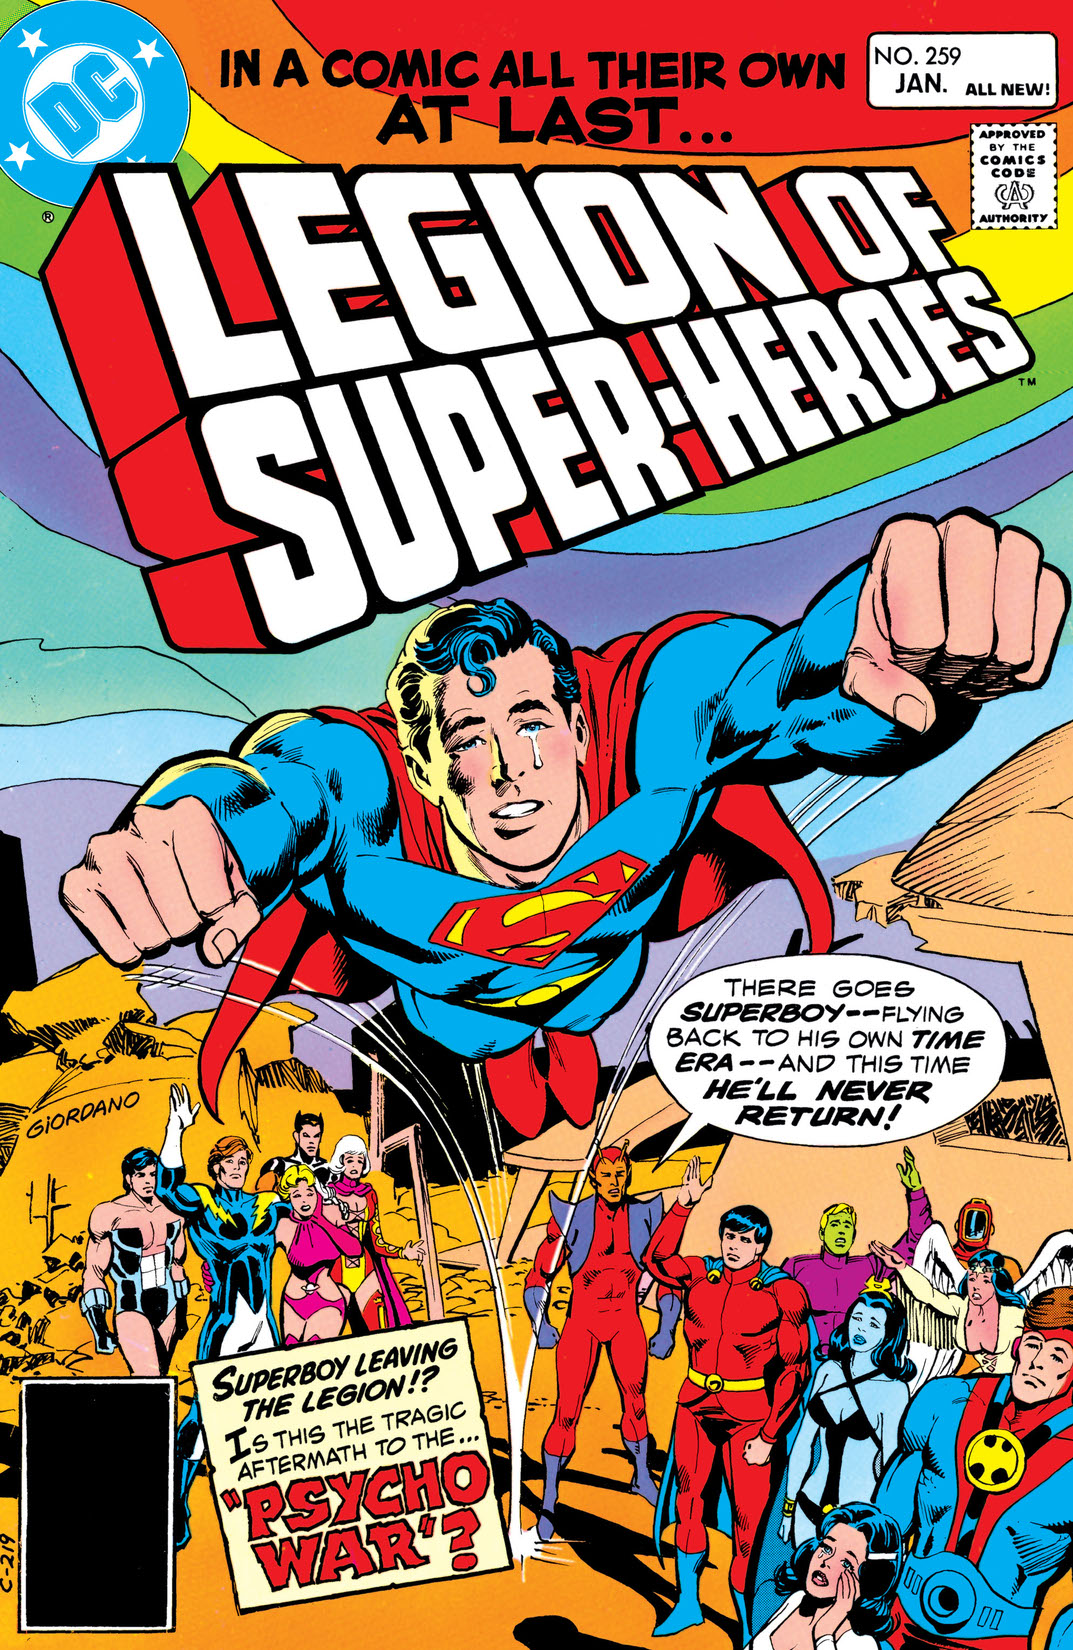 The Legion of Super-Heroes (1980-) #259 preview images